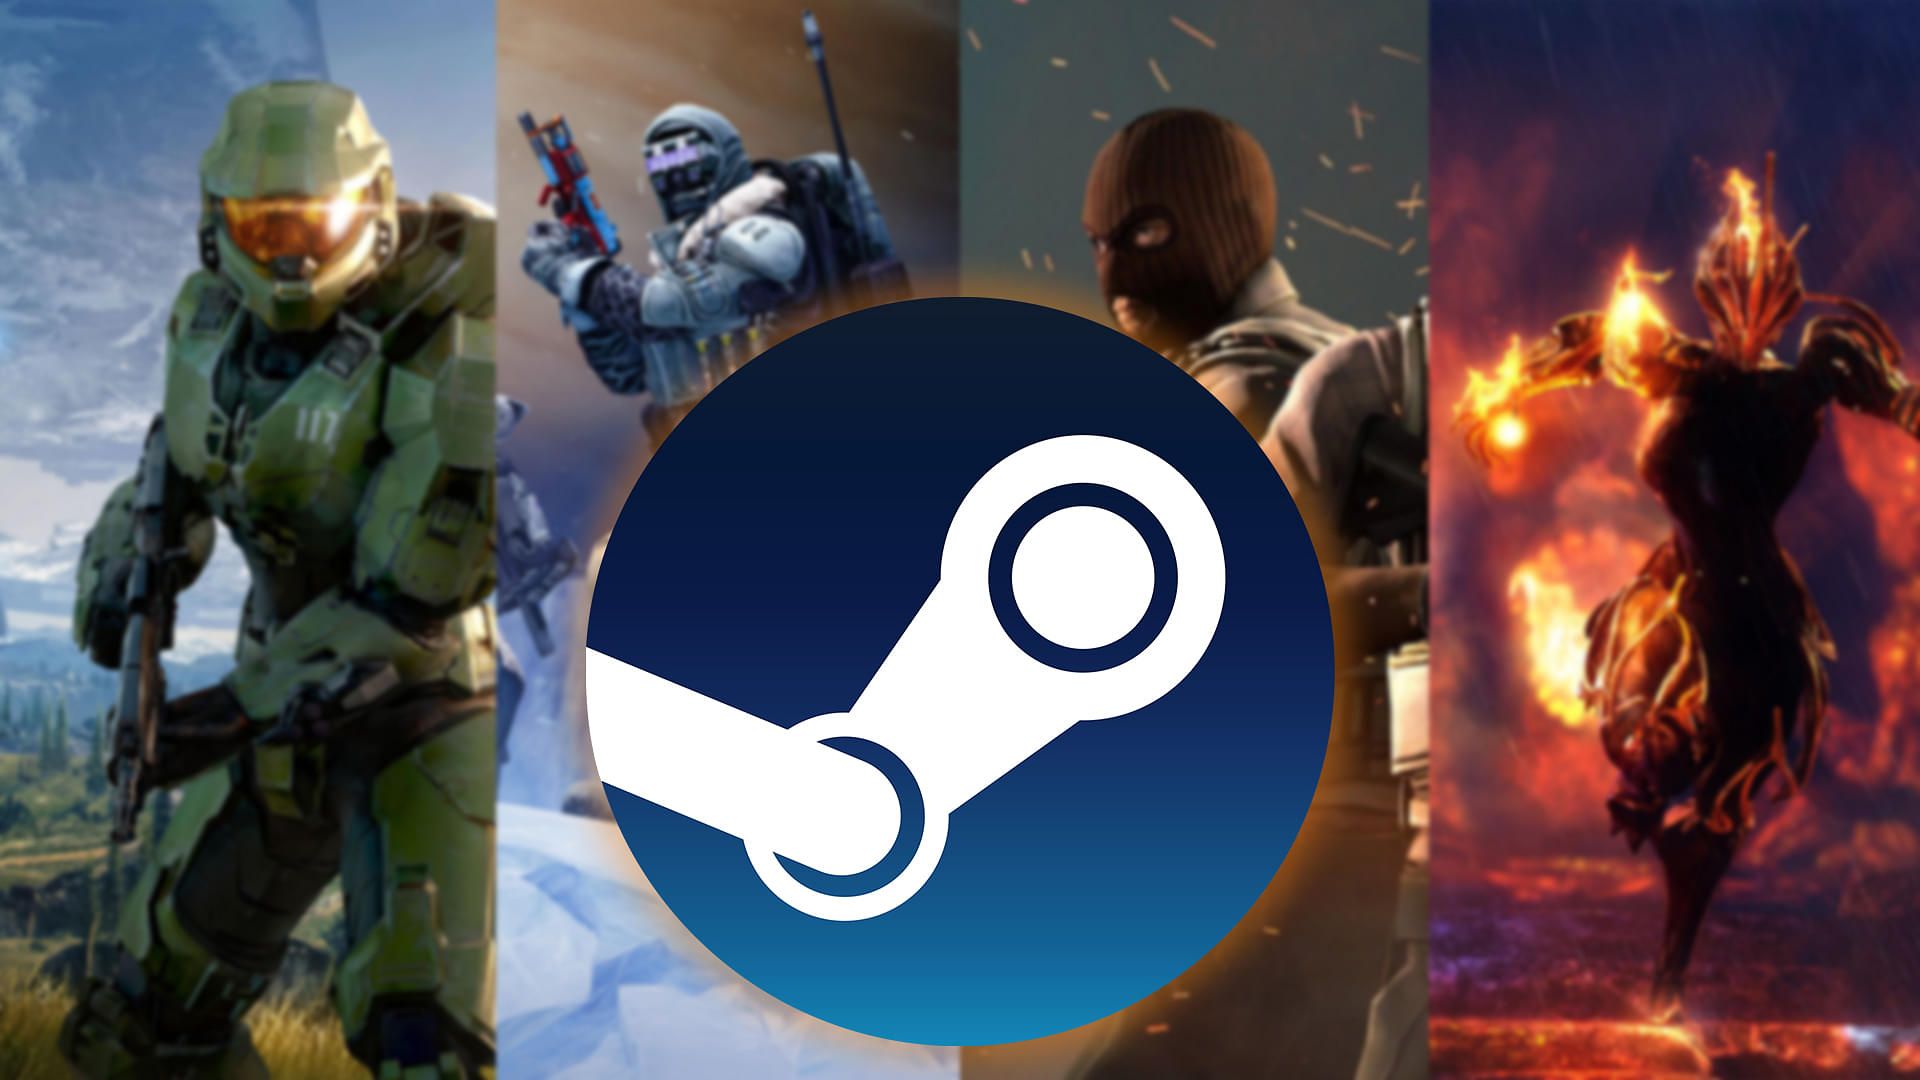 An image showing a collage of games i background with Steam logo in front